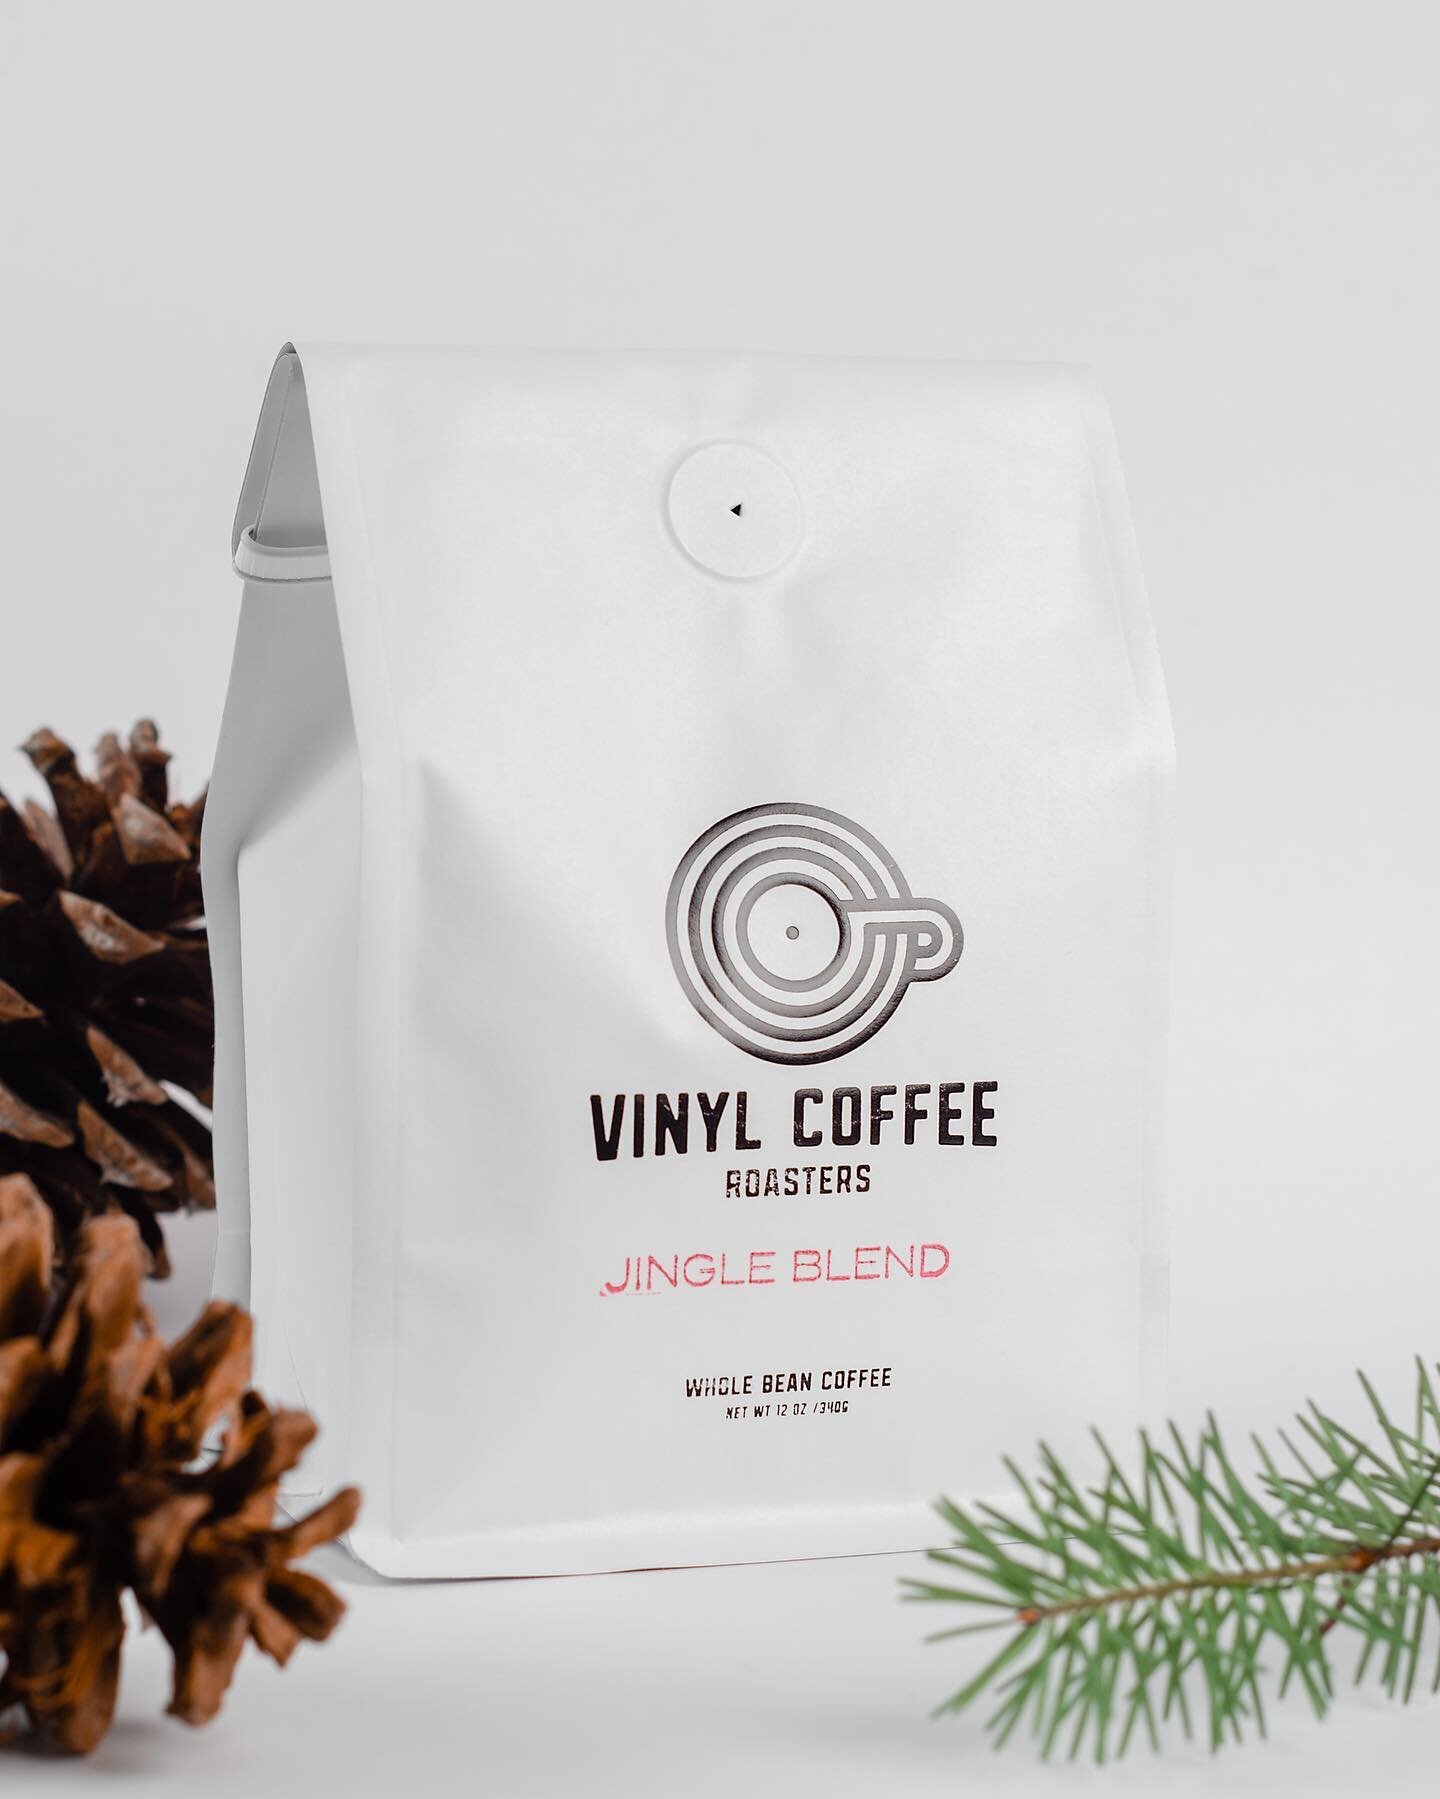 CYBER MONDAY DEAL: Use the promo code GIVEAJINGLE and receive $5 off your order today! 

Try our JINGLE BLEND is a medium to darker roast with notes of hazelnut, vanilla, and cloves. The perfect blend to usher in the holidays!